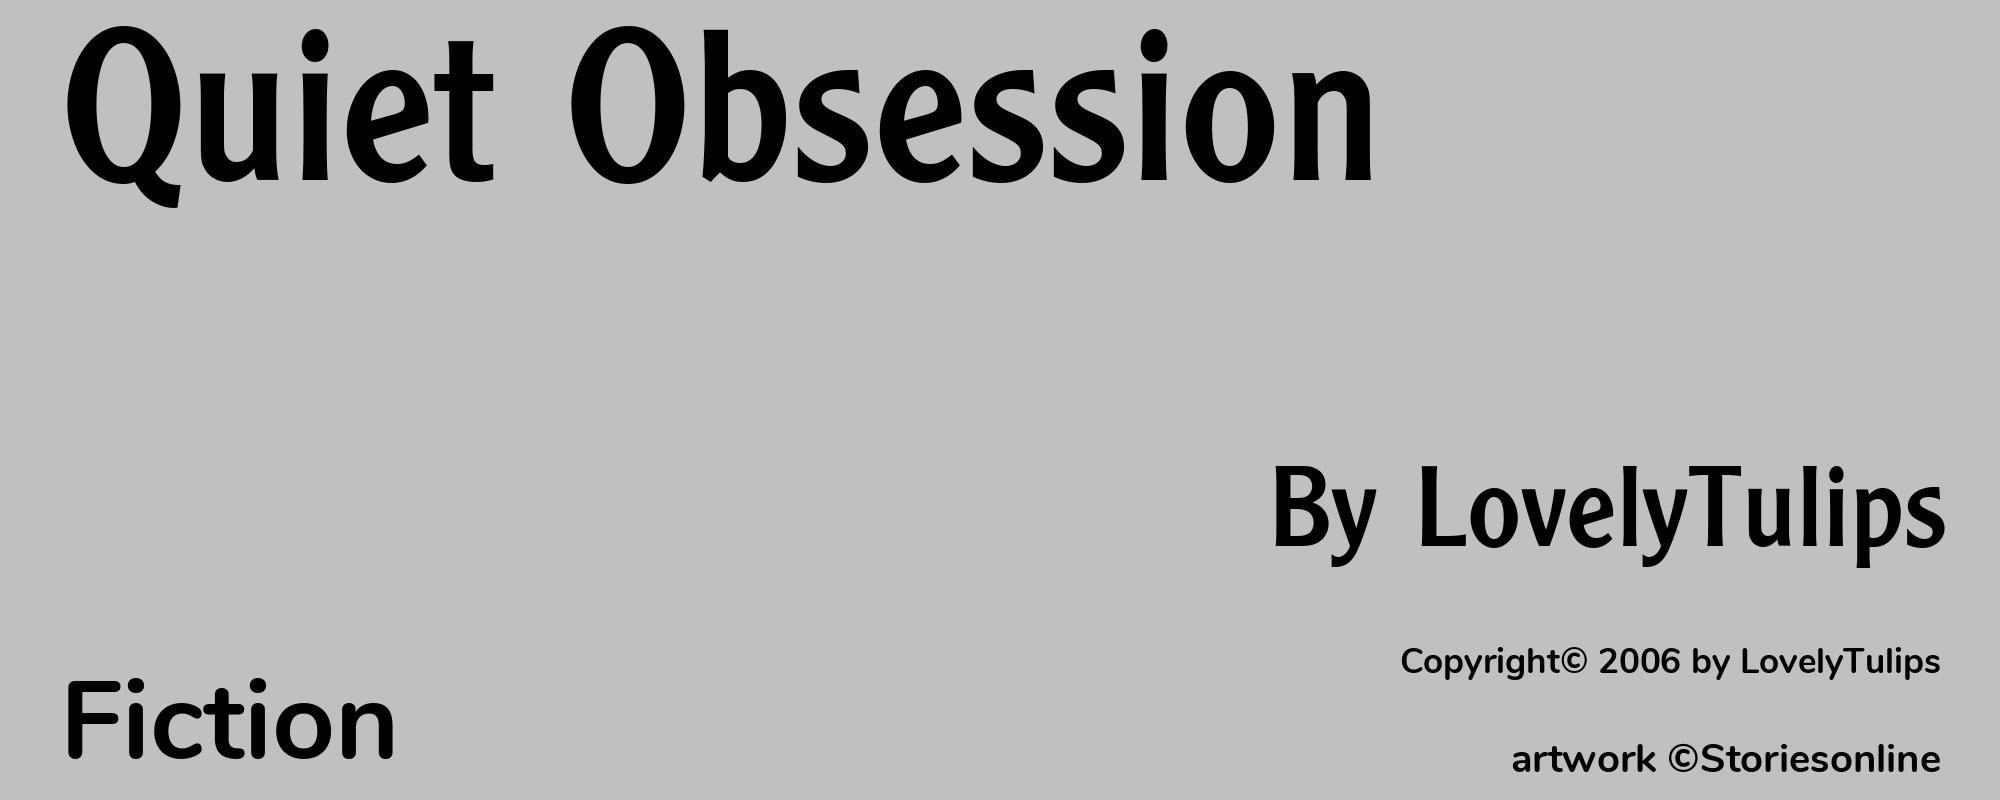 Quiet Obsession - Cover